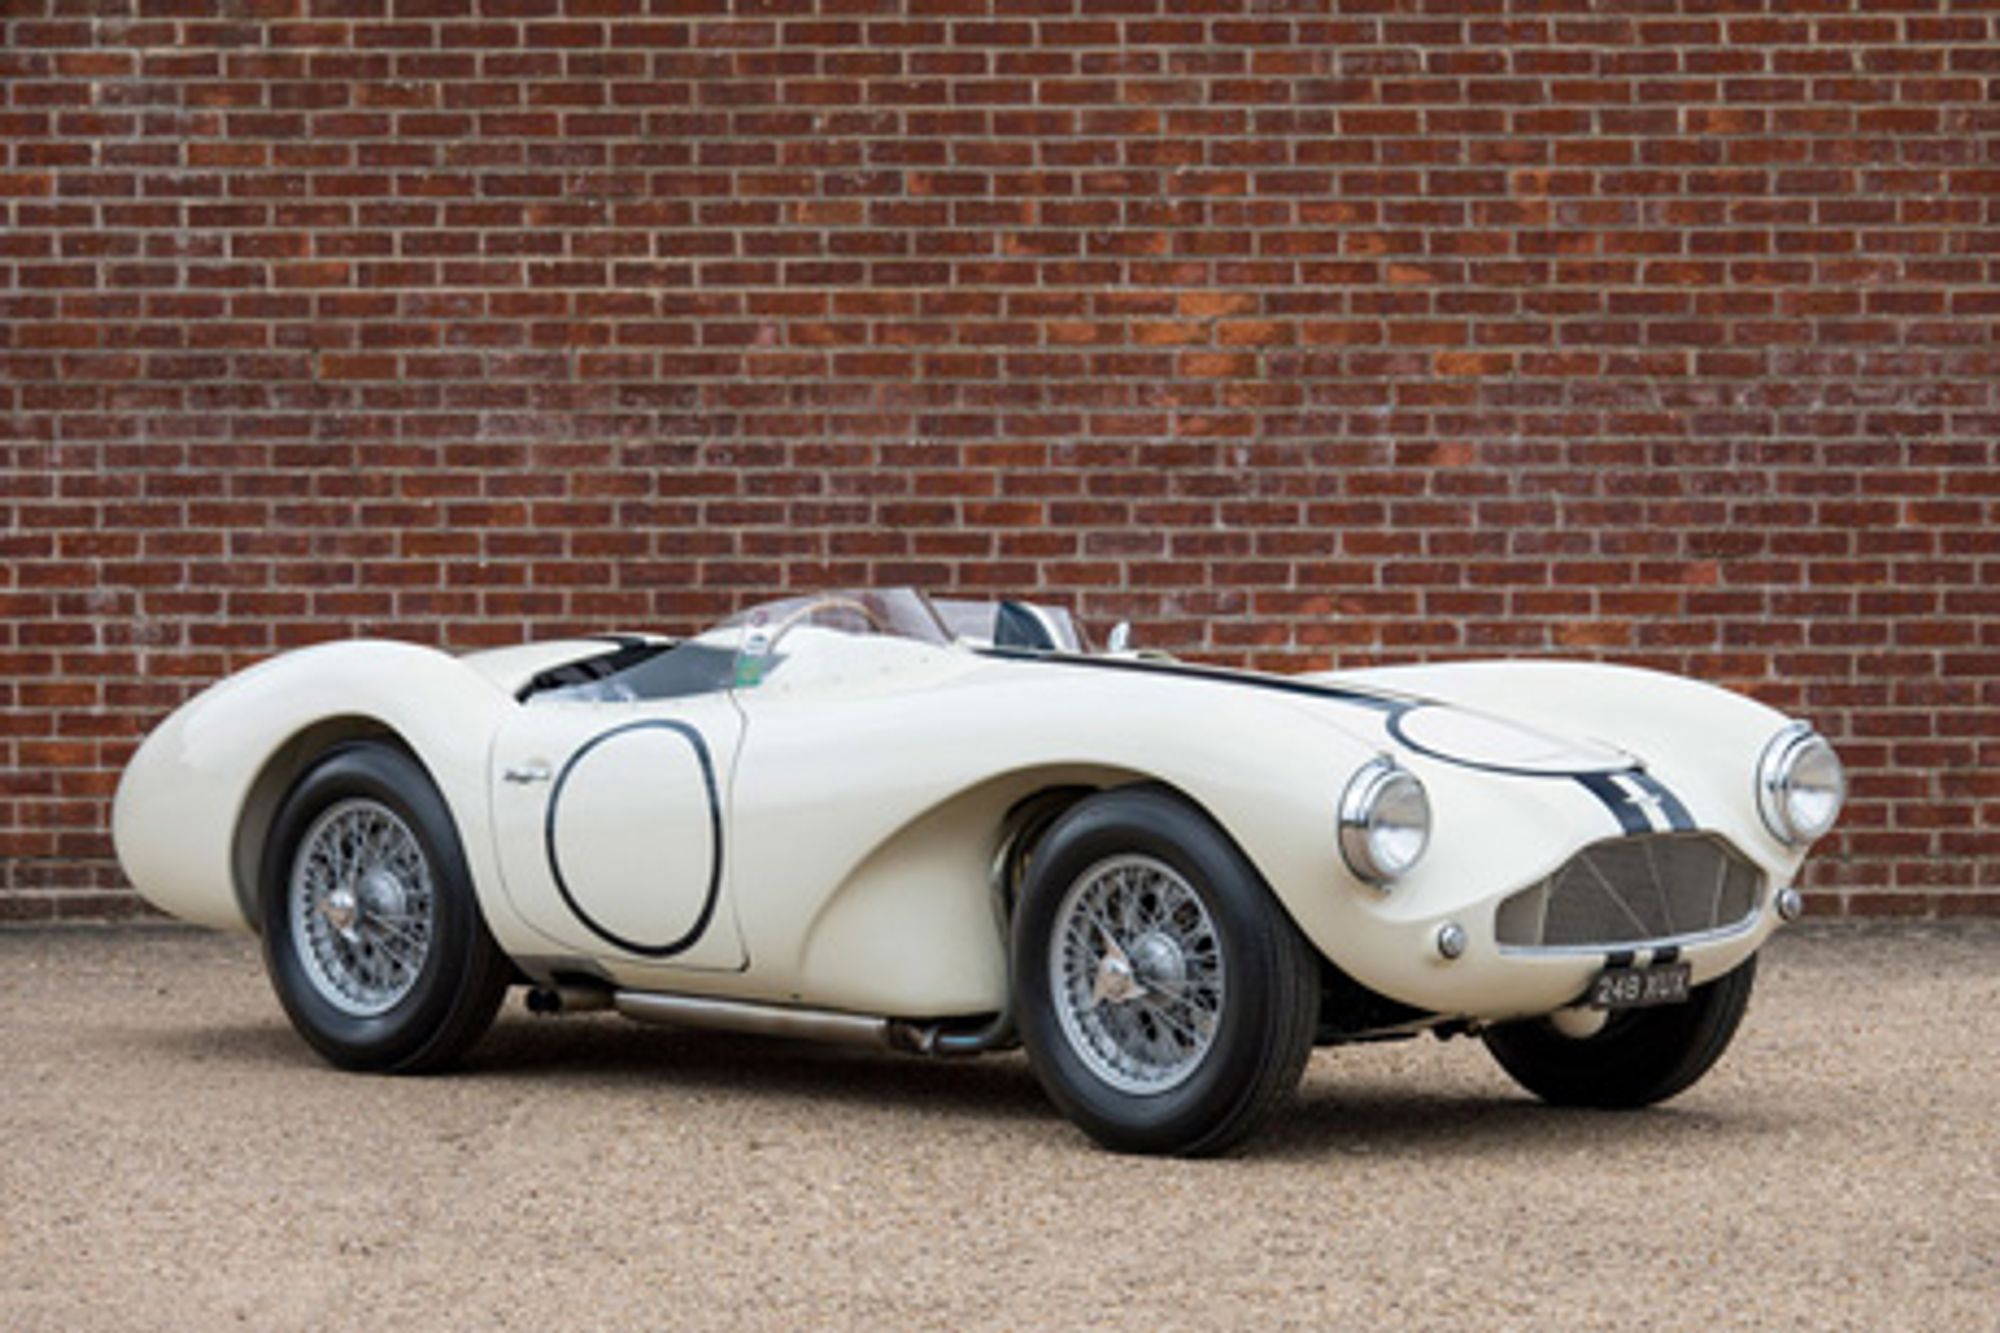 Fiskens offer examples from Aston Martin's two most illustrious era's of Sports Car Racing